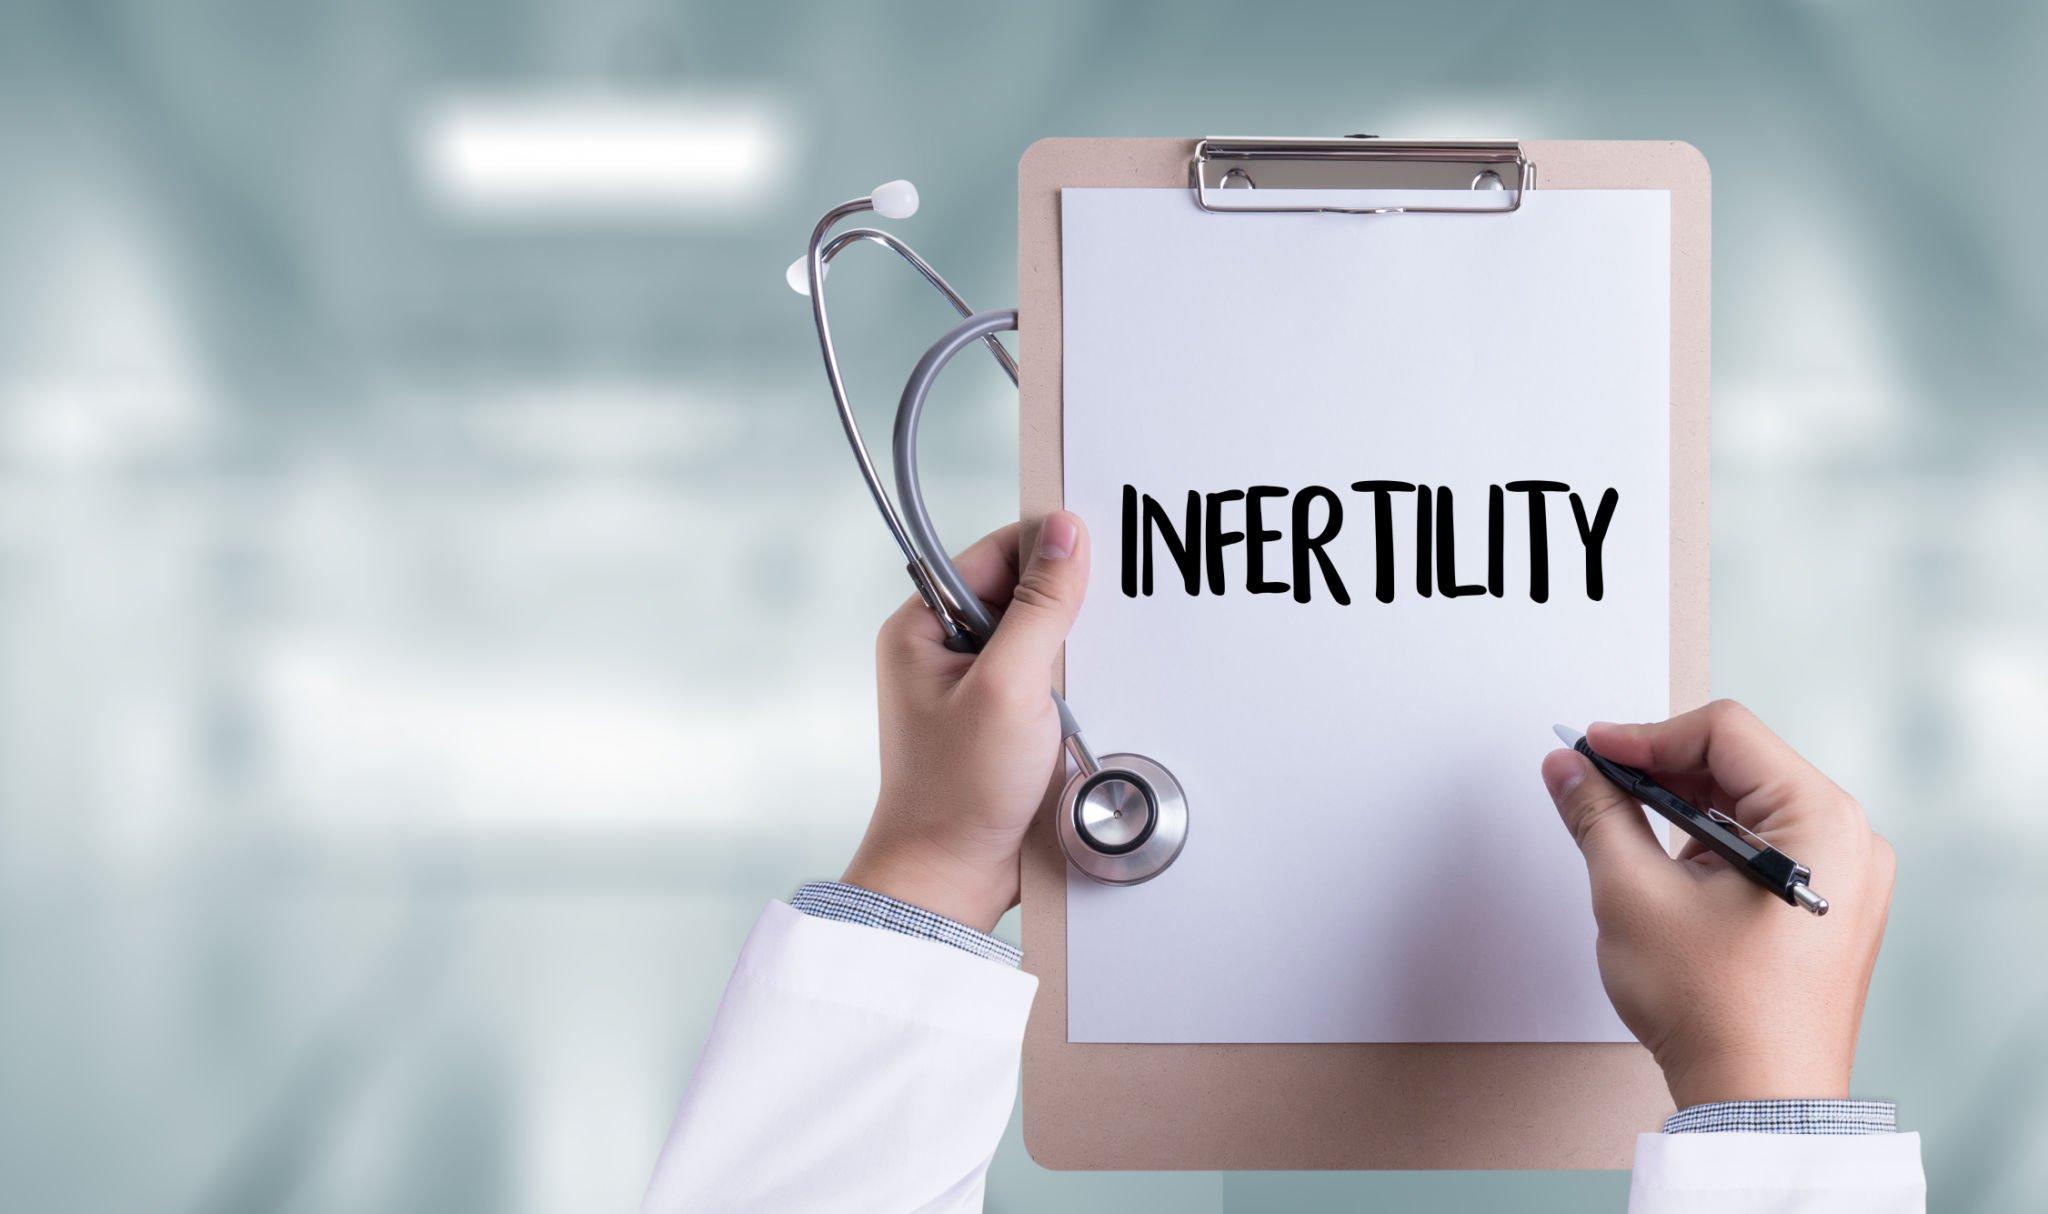 Cure for Infertility image